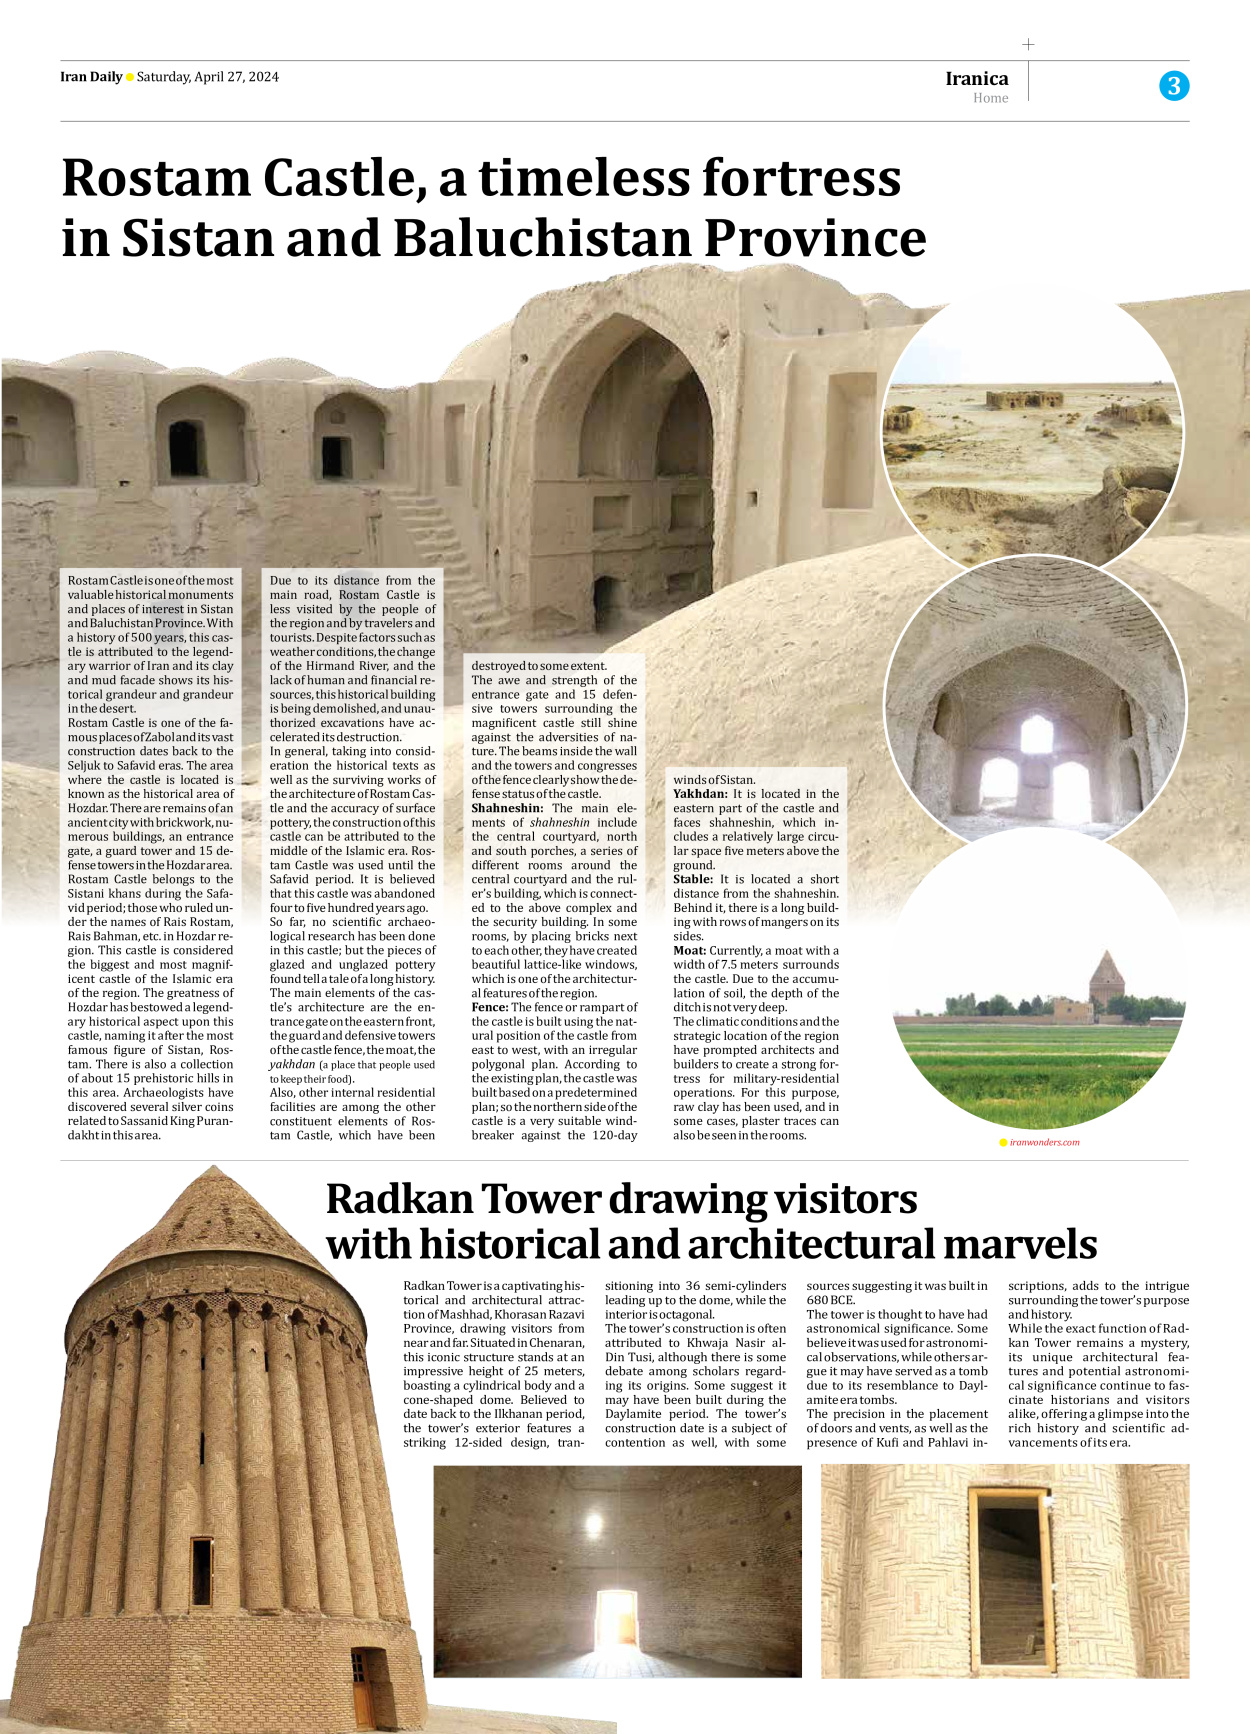 Iran Daily - Number Seven Thousand Five Hundred and Forty Three - 27 April 2024 - Page 3